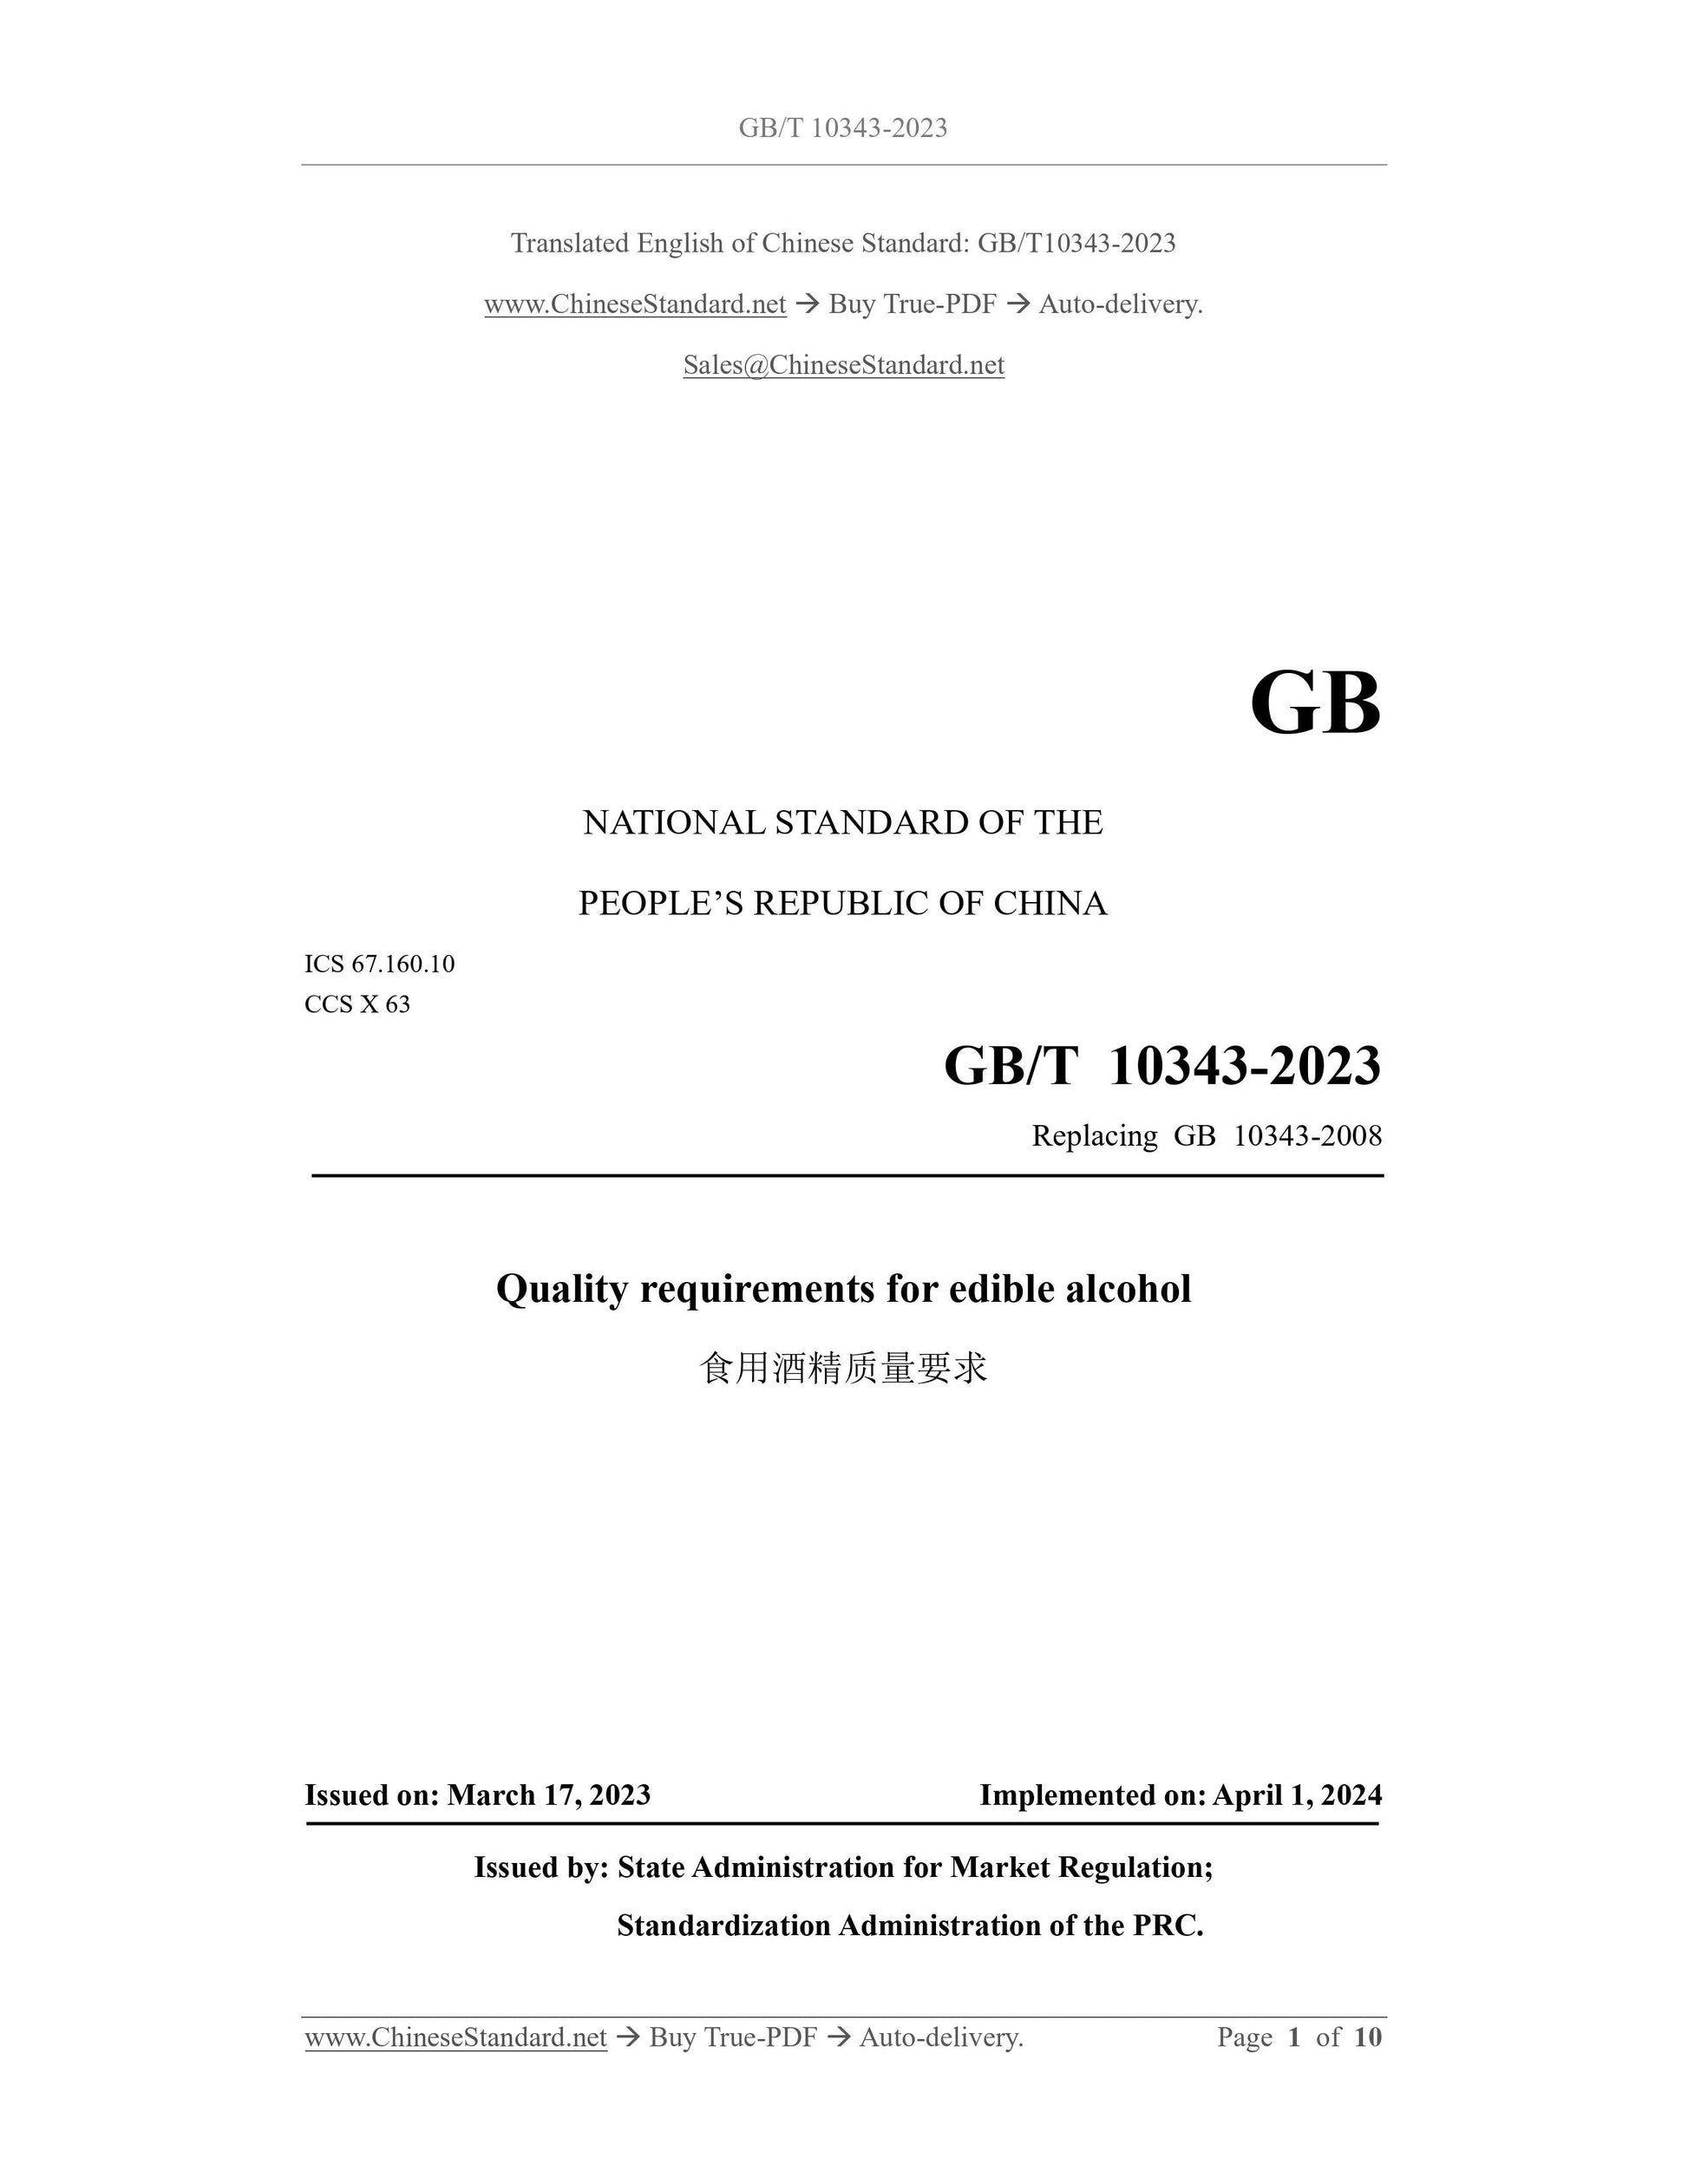 GB/T 10343-2023 Page 1